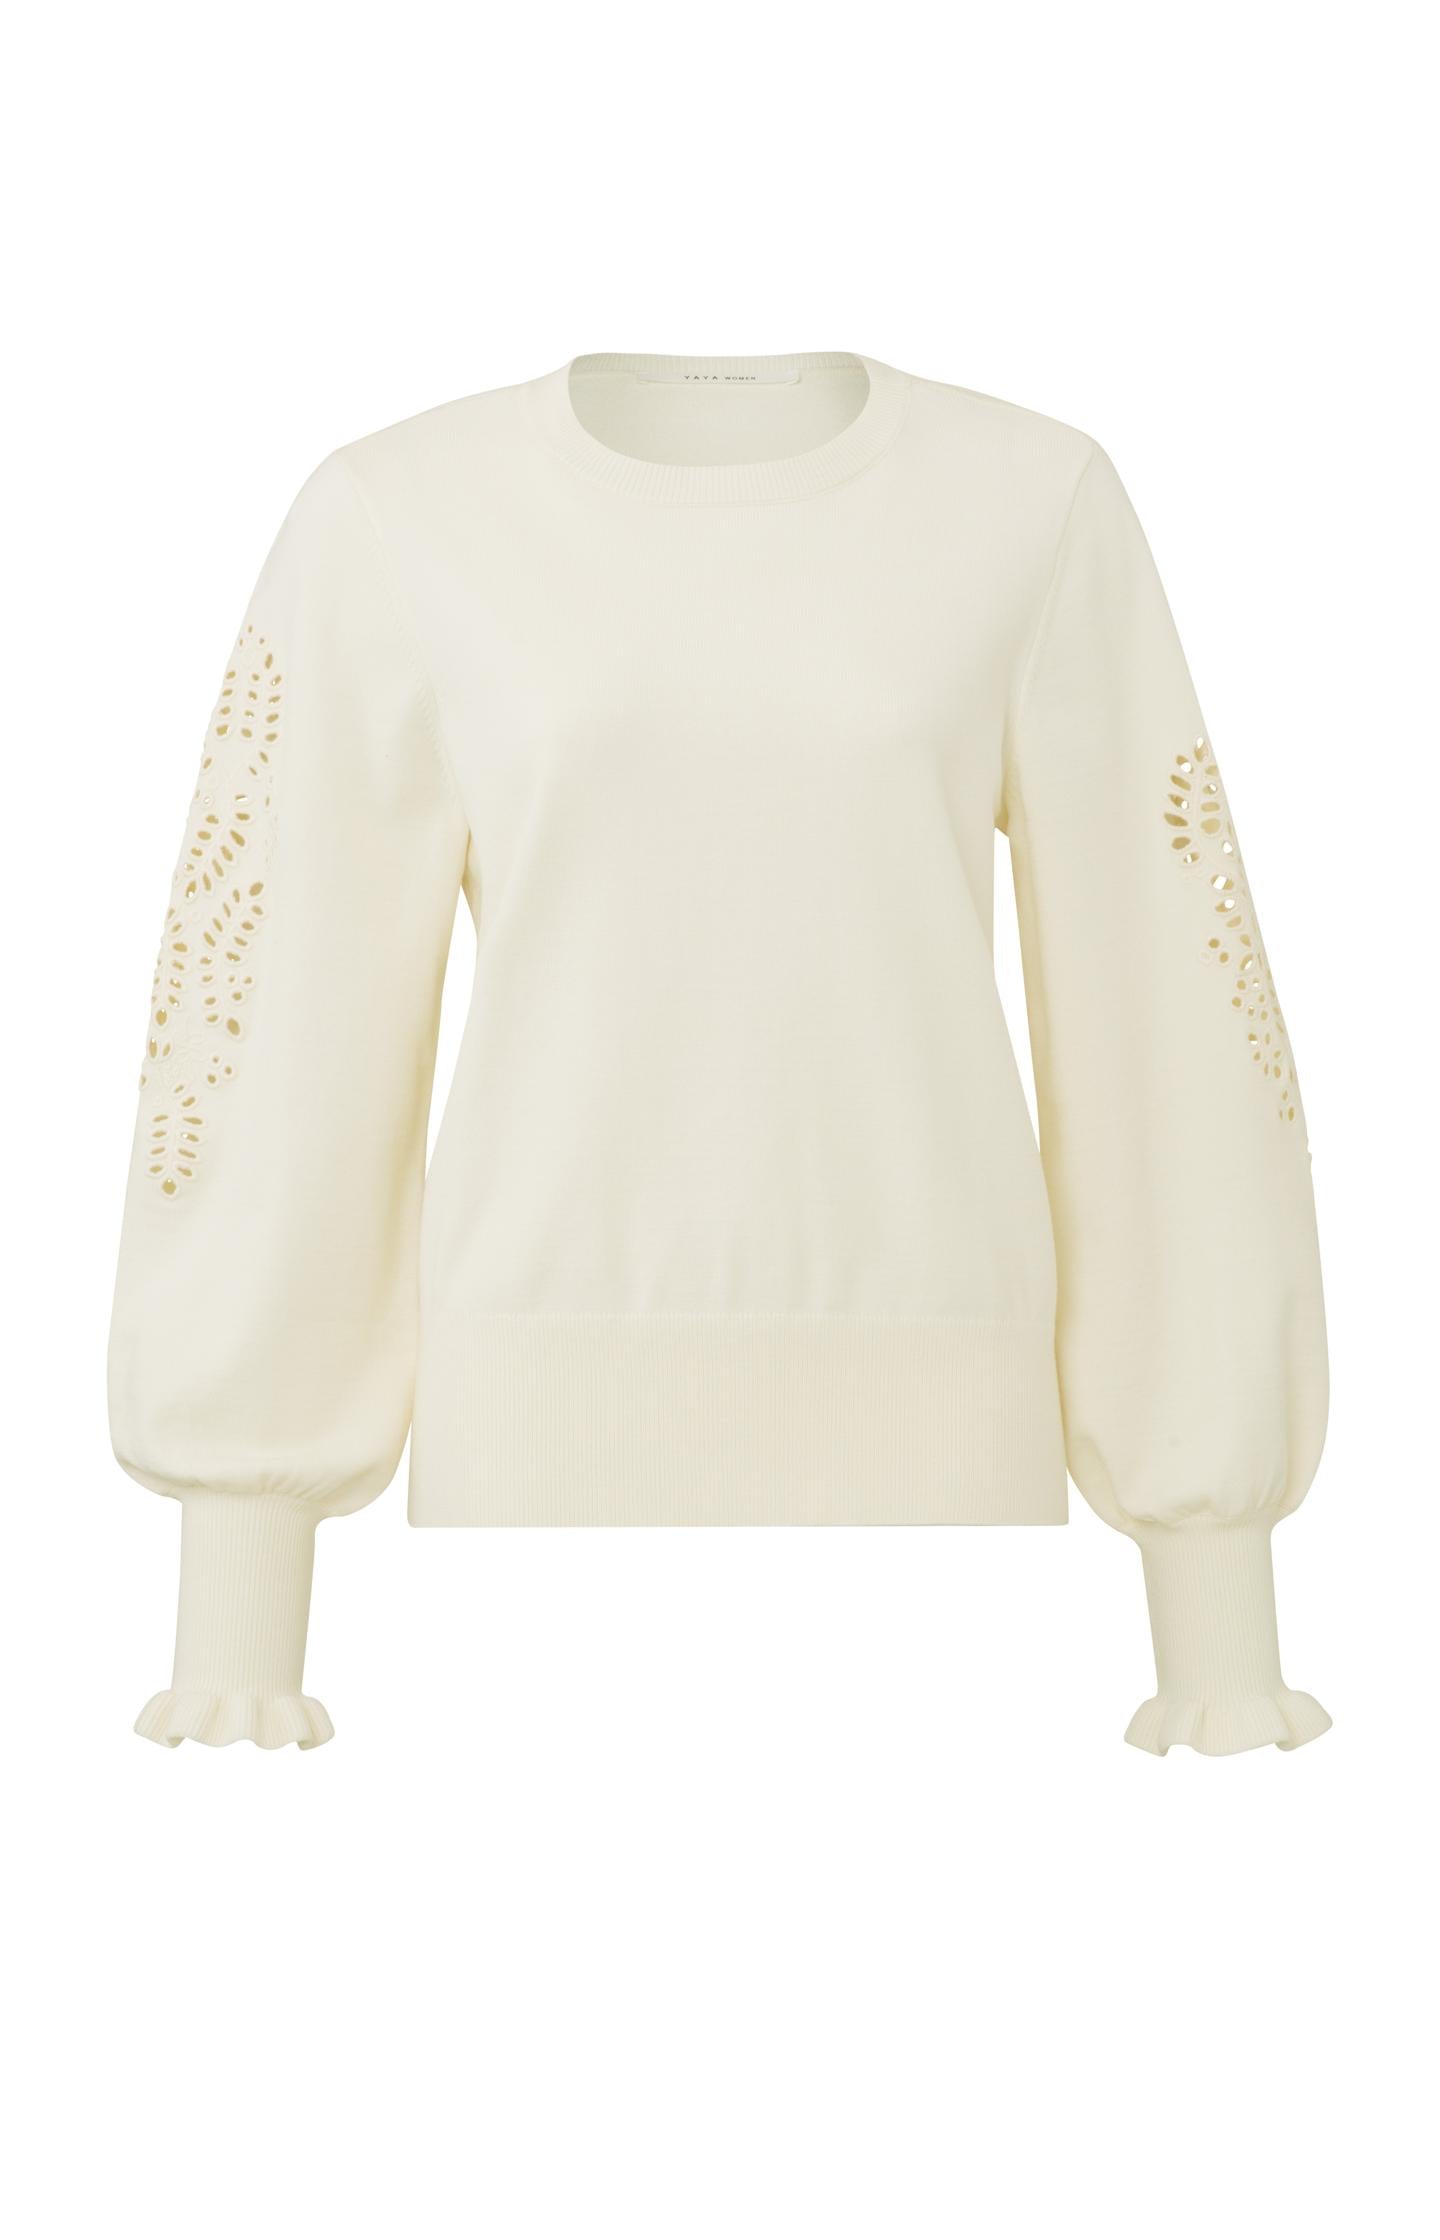 Laser cut sweater with round neck, long detailed puff sleeve - Type: product